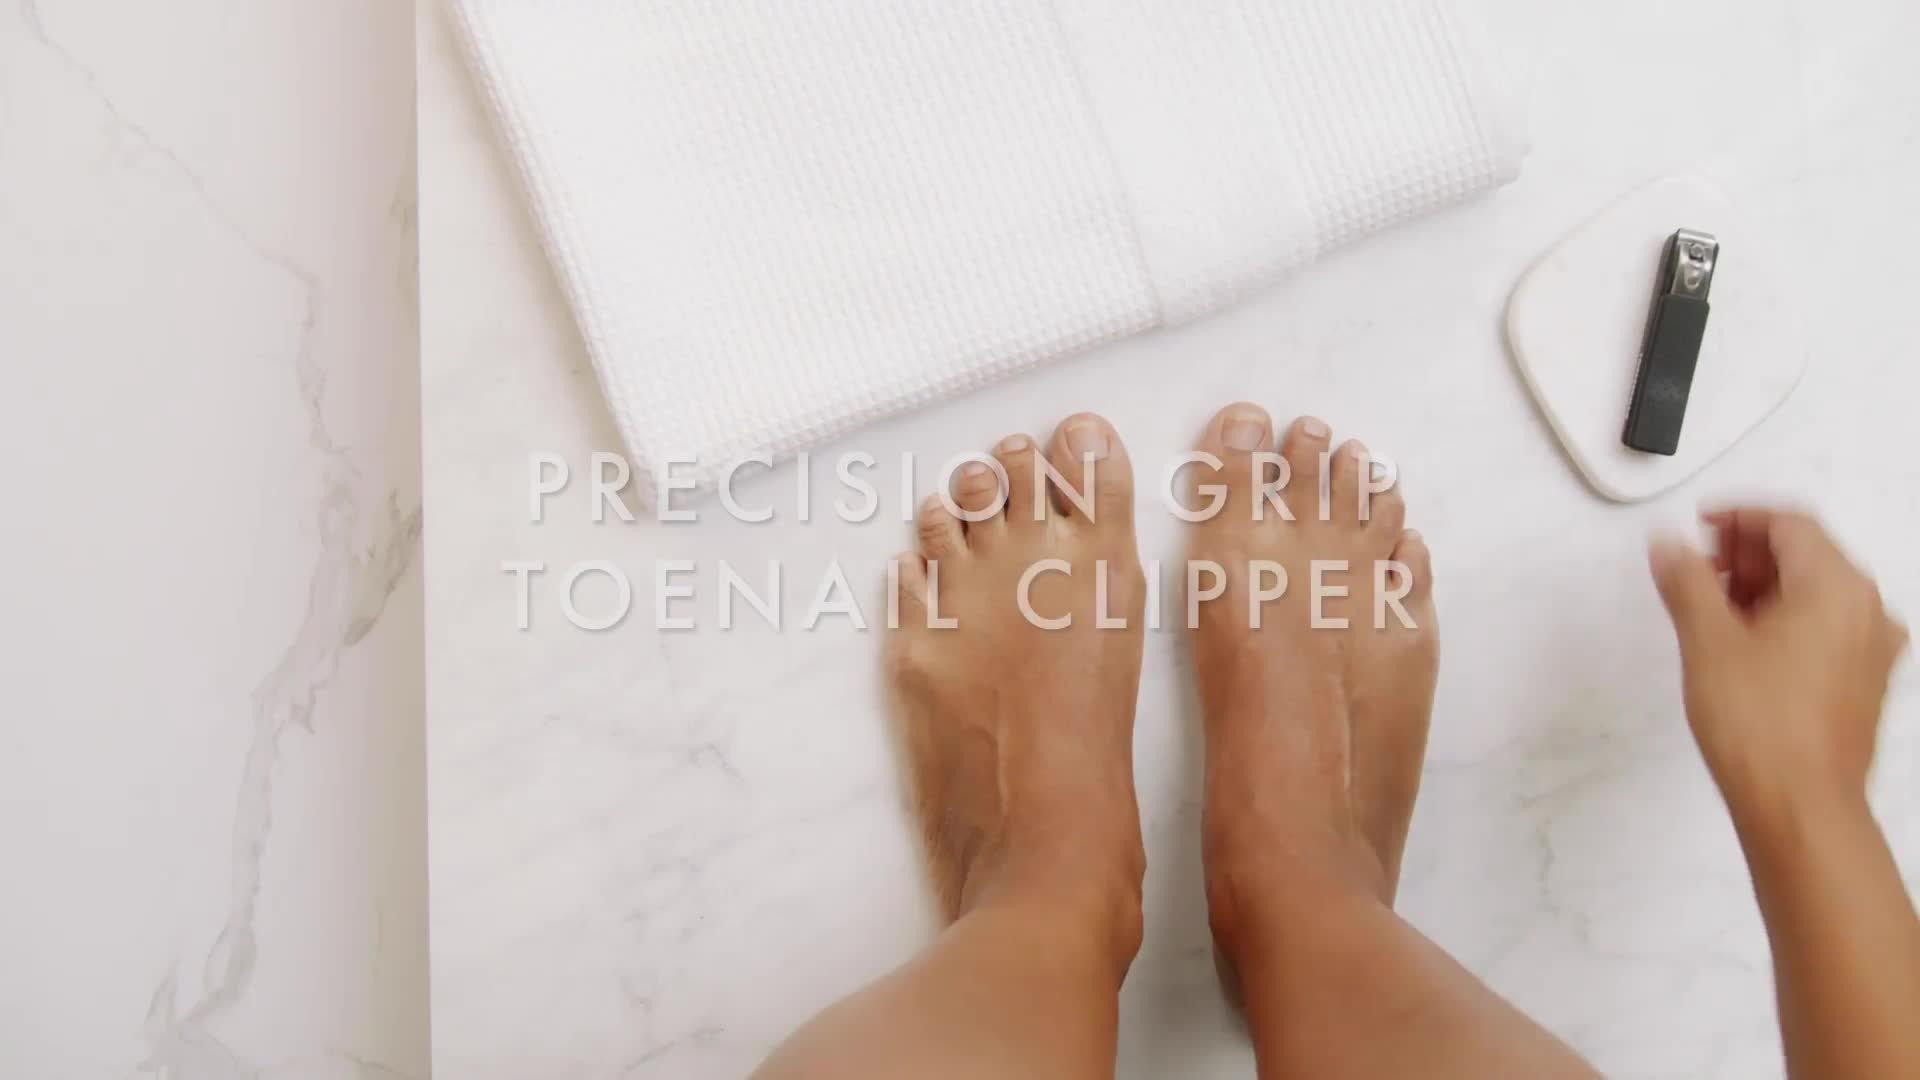 Mind your toenail clippers